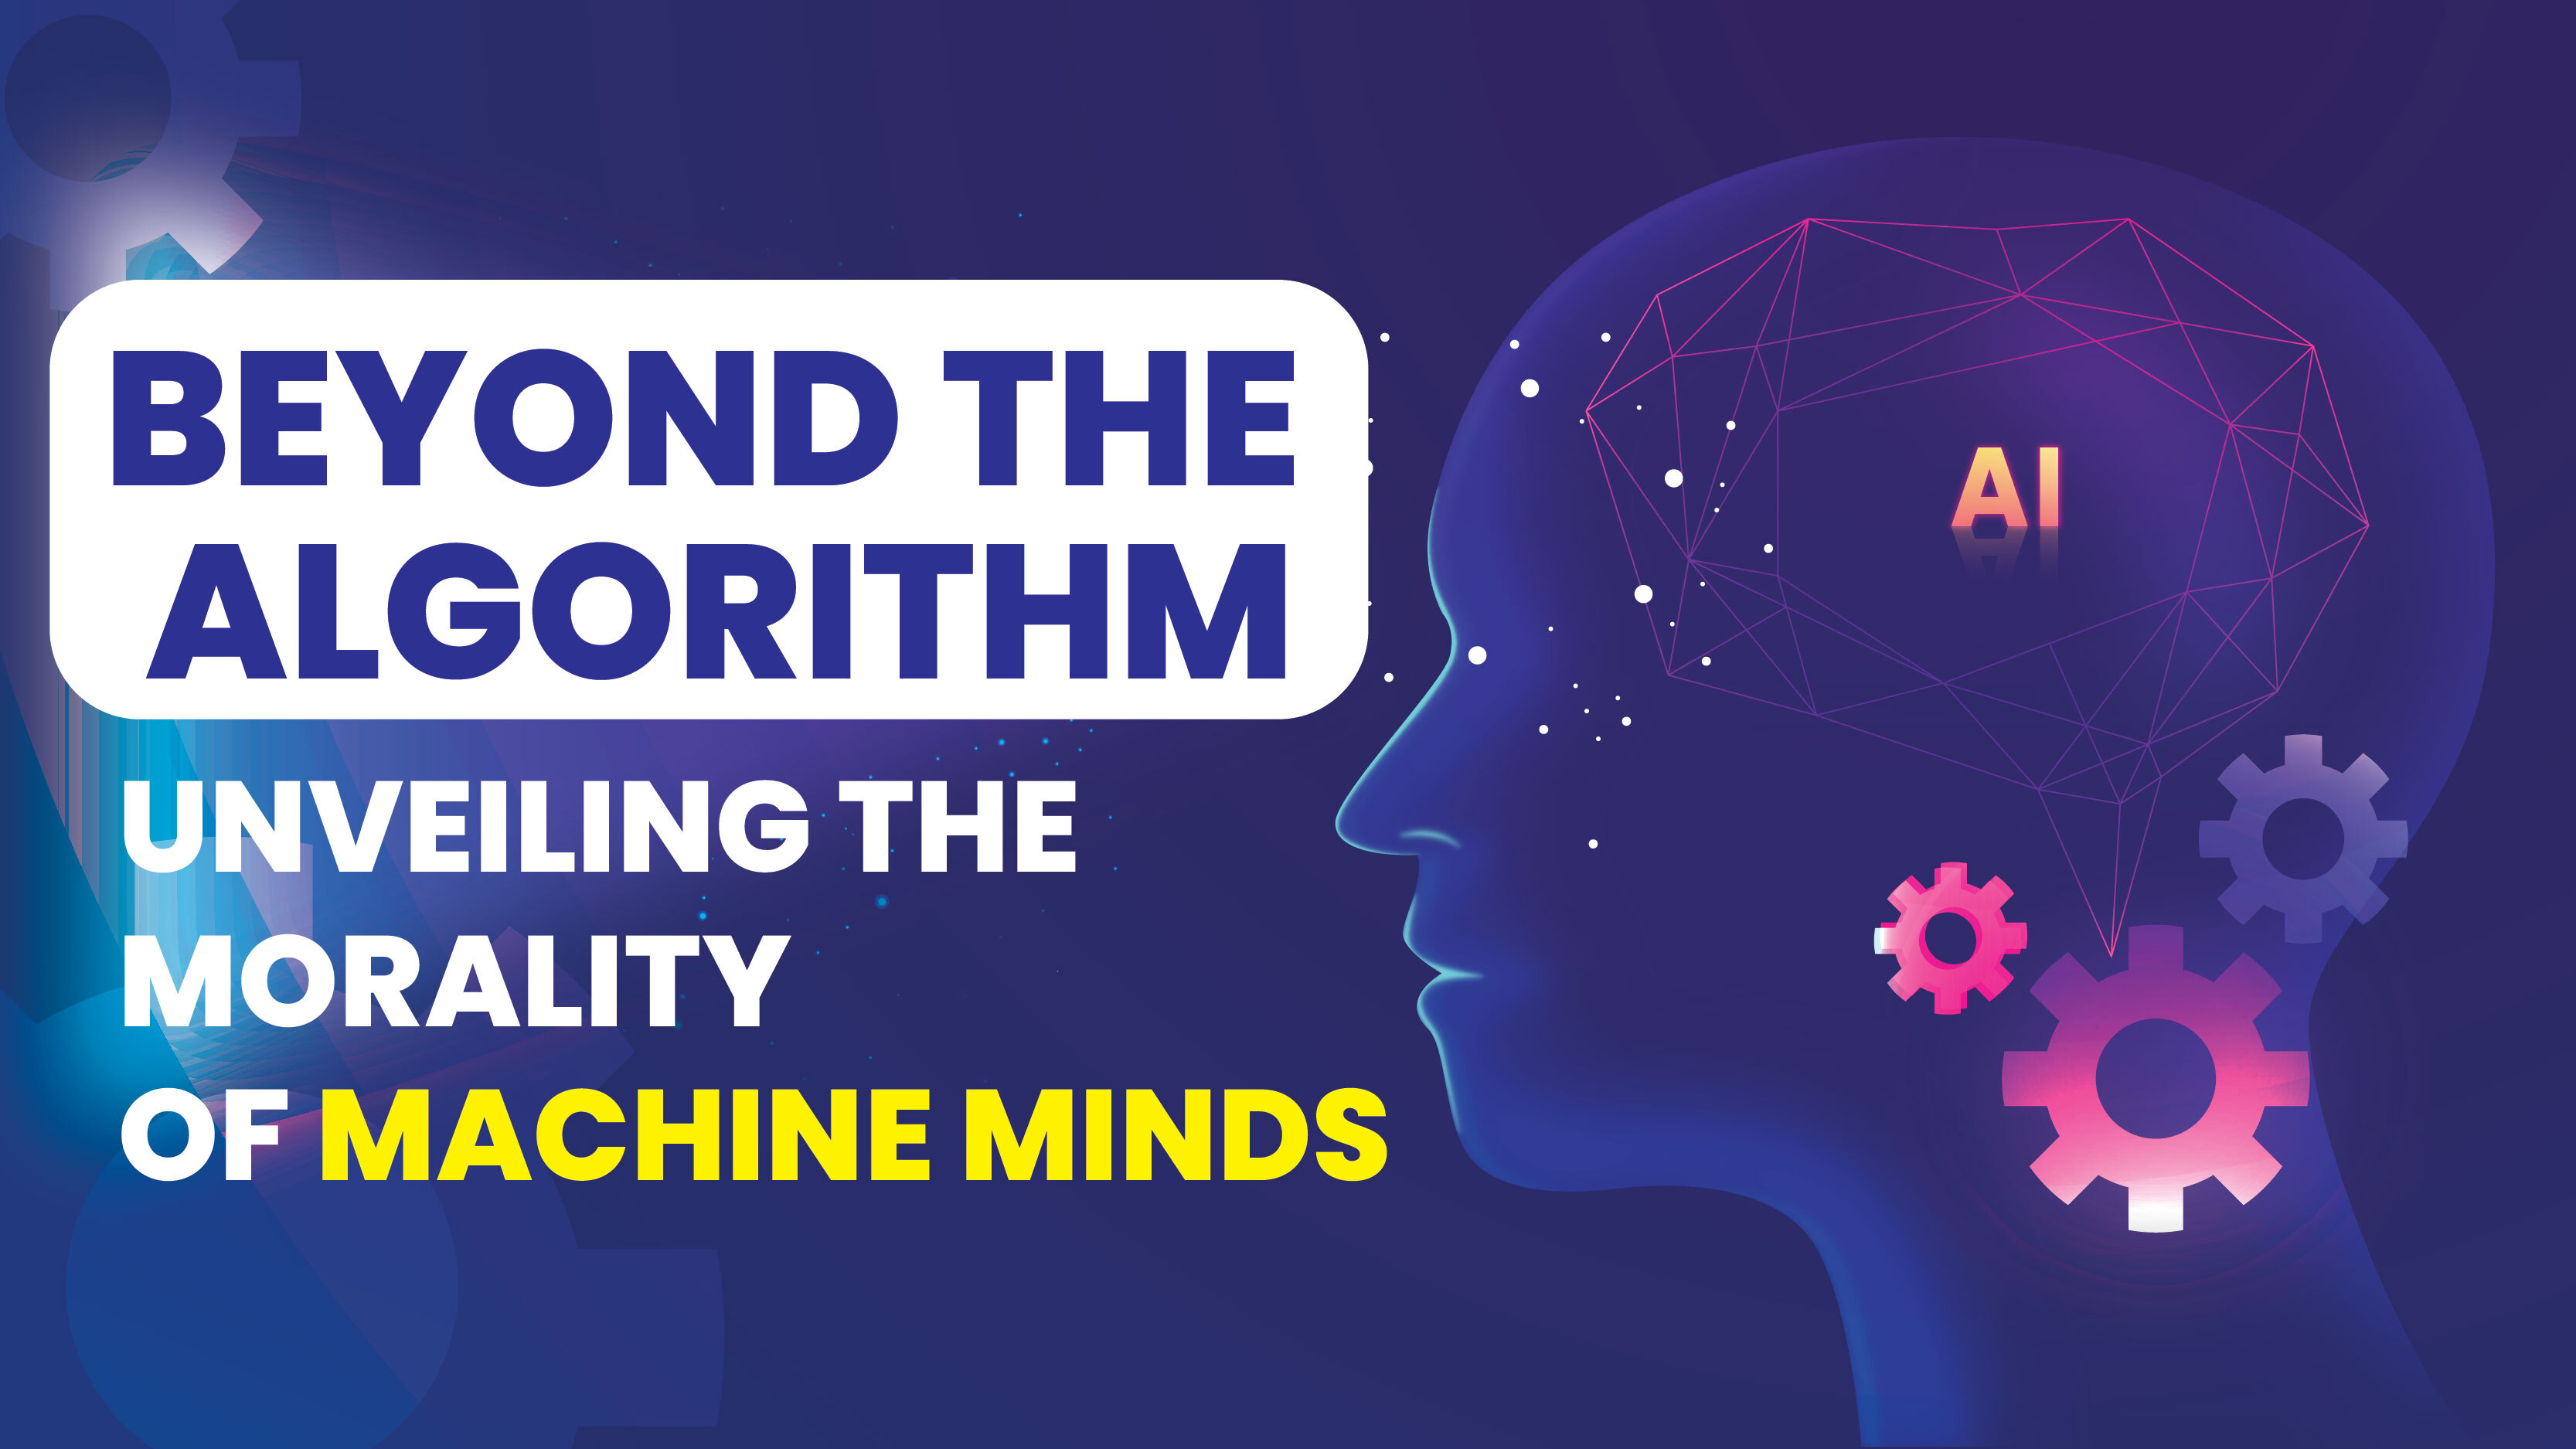 Beyond the Algorithm: Unveiling the Morality of Machine Minds.